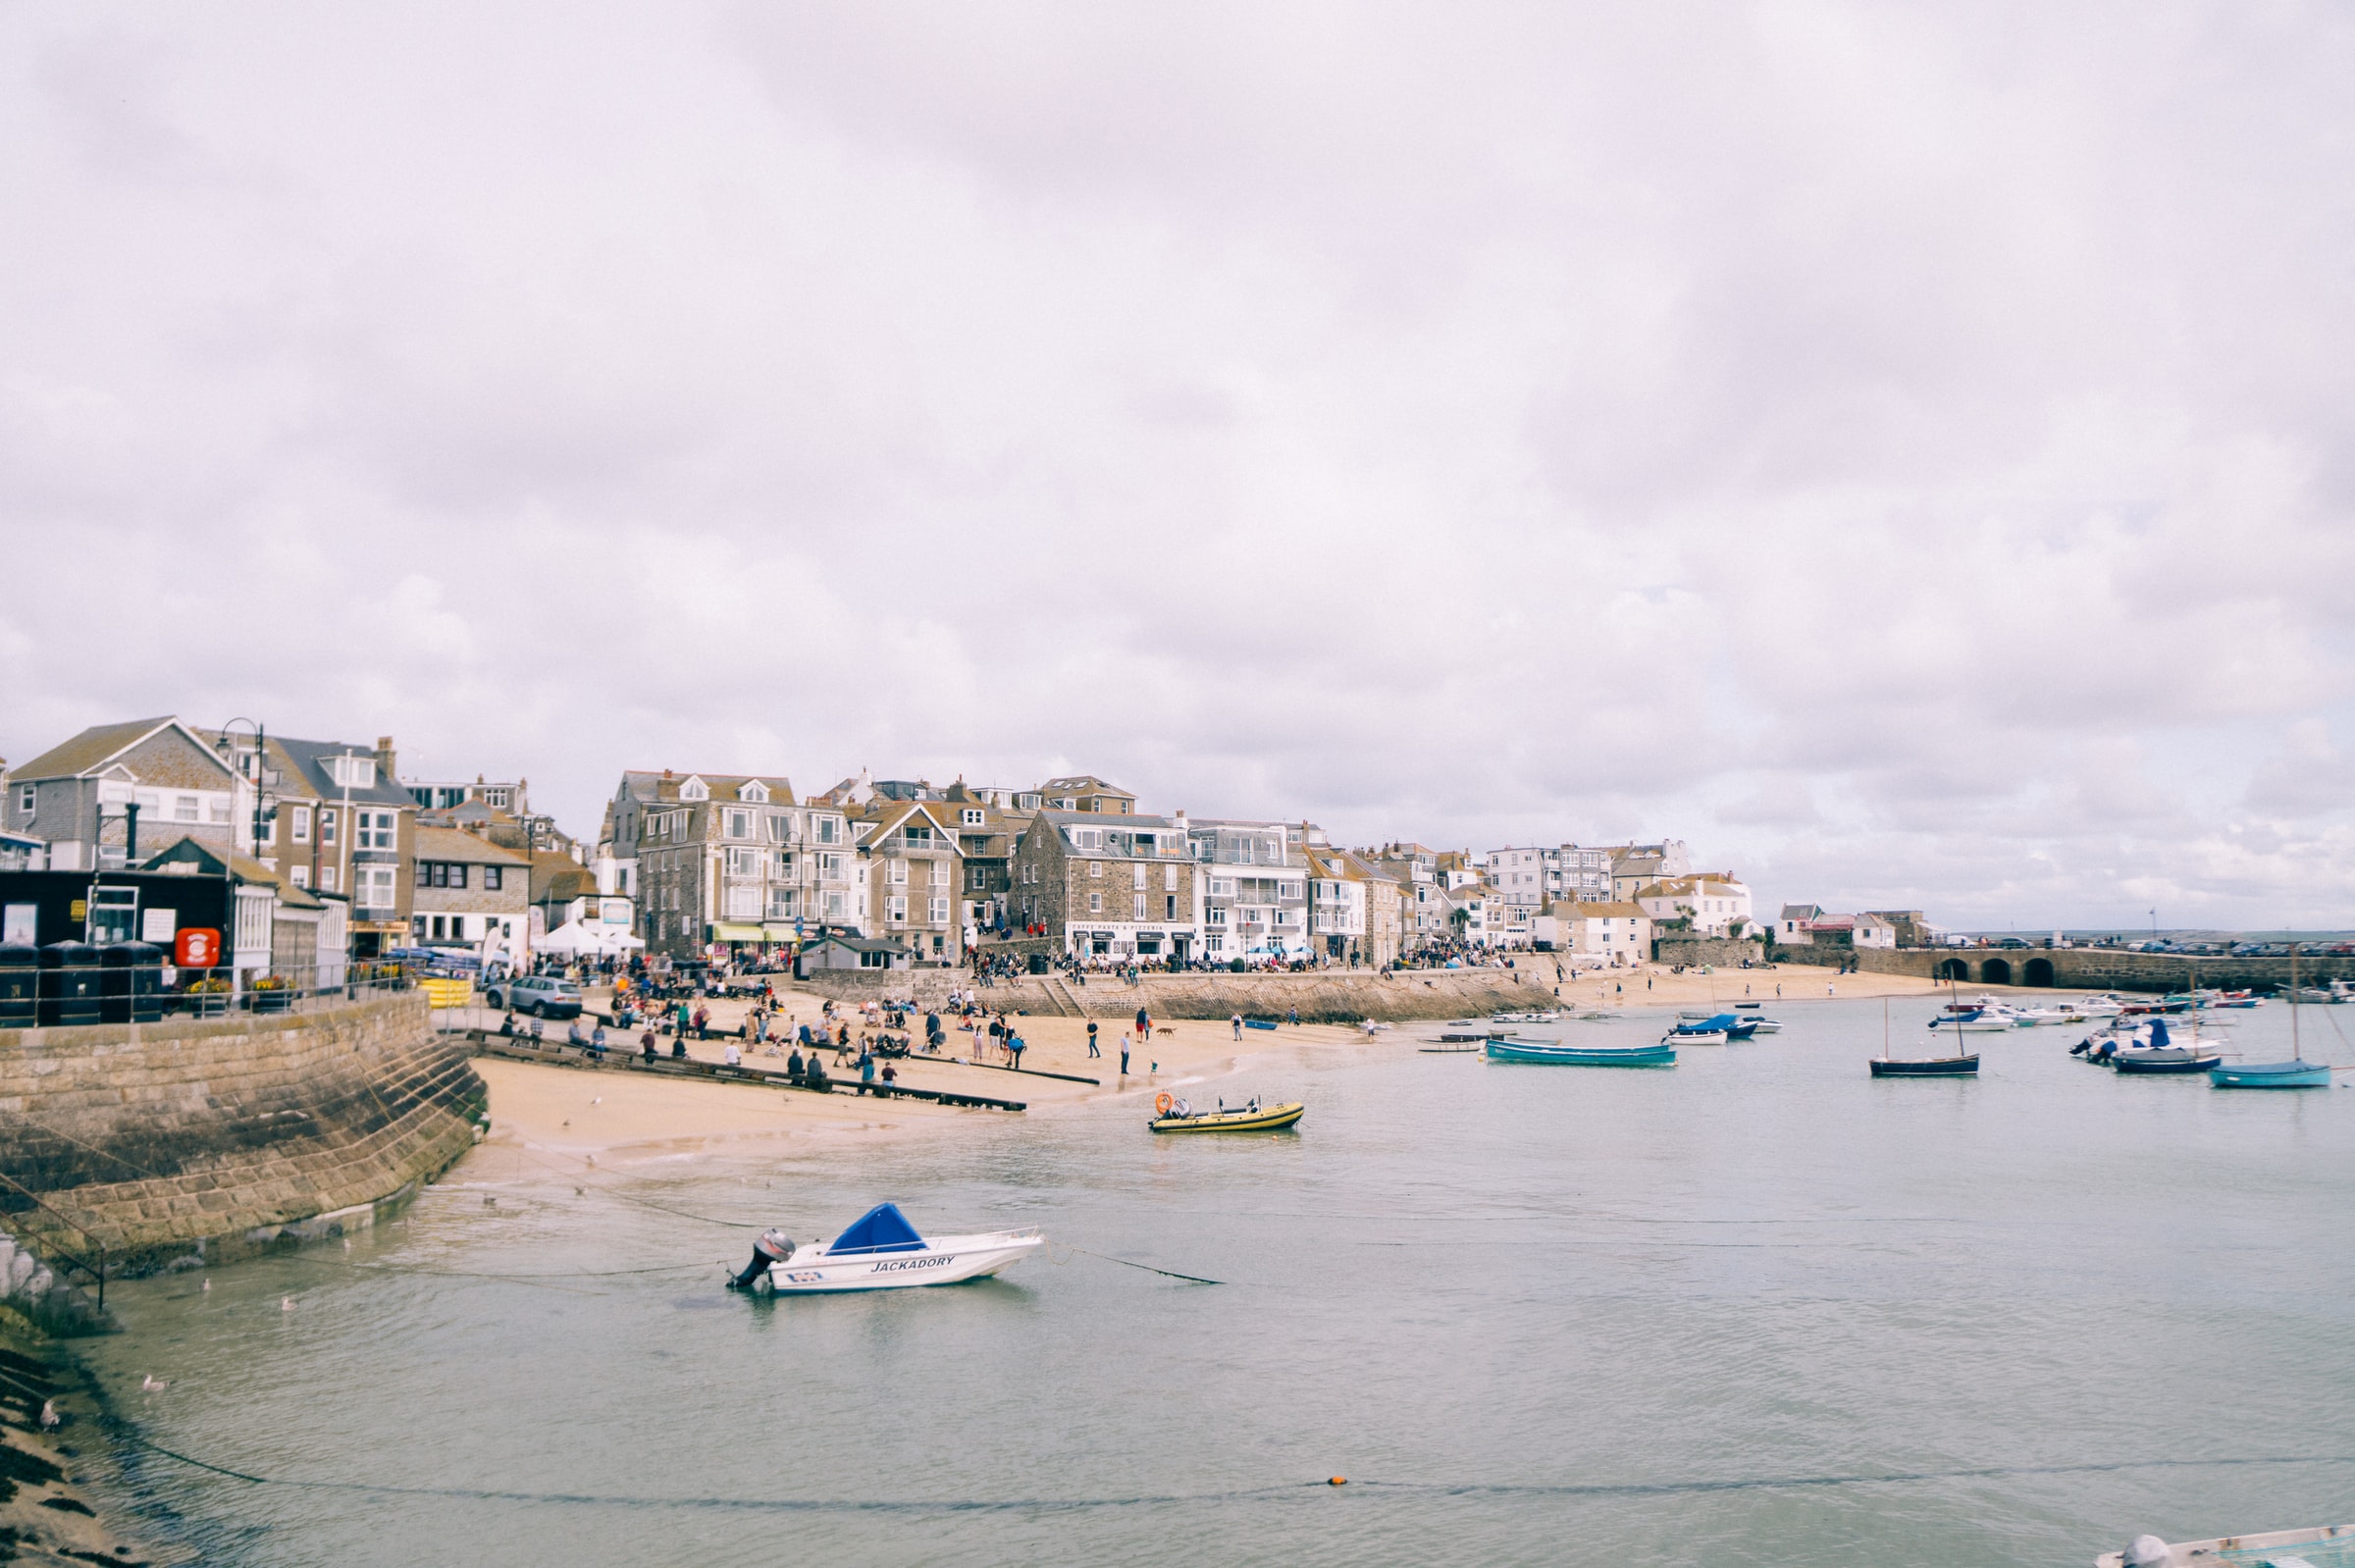 How Will Nine Projects Help To ‘Level Up’ St Ives?